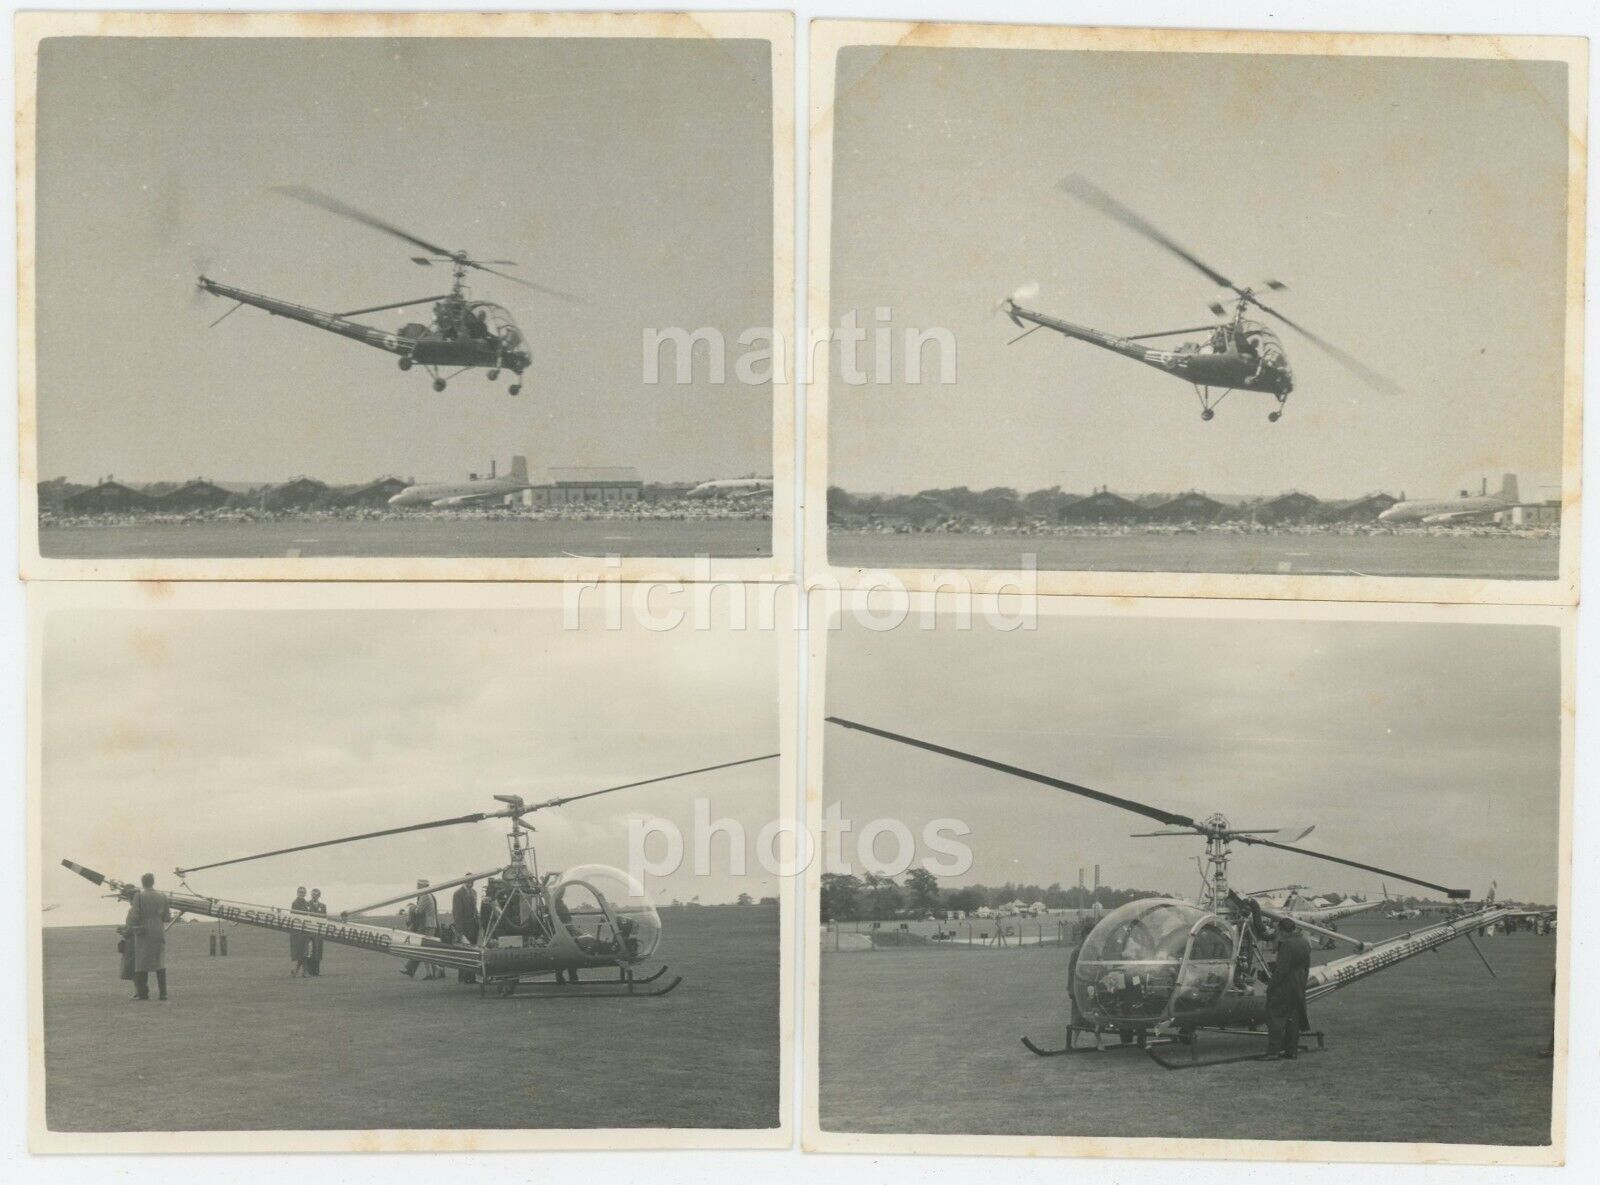 Hiller  HTE-2 & UH-12C Helicopter Lot of 4 Photos, CX006